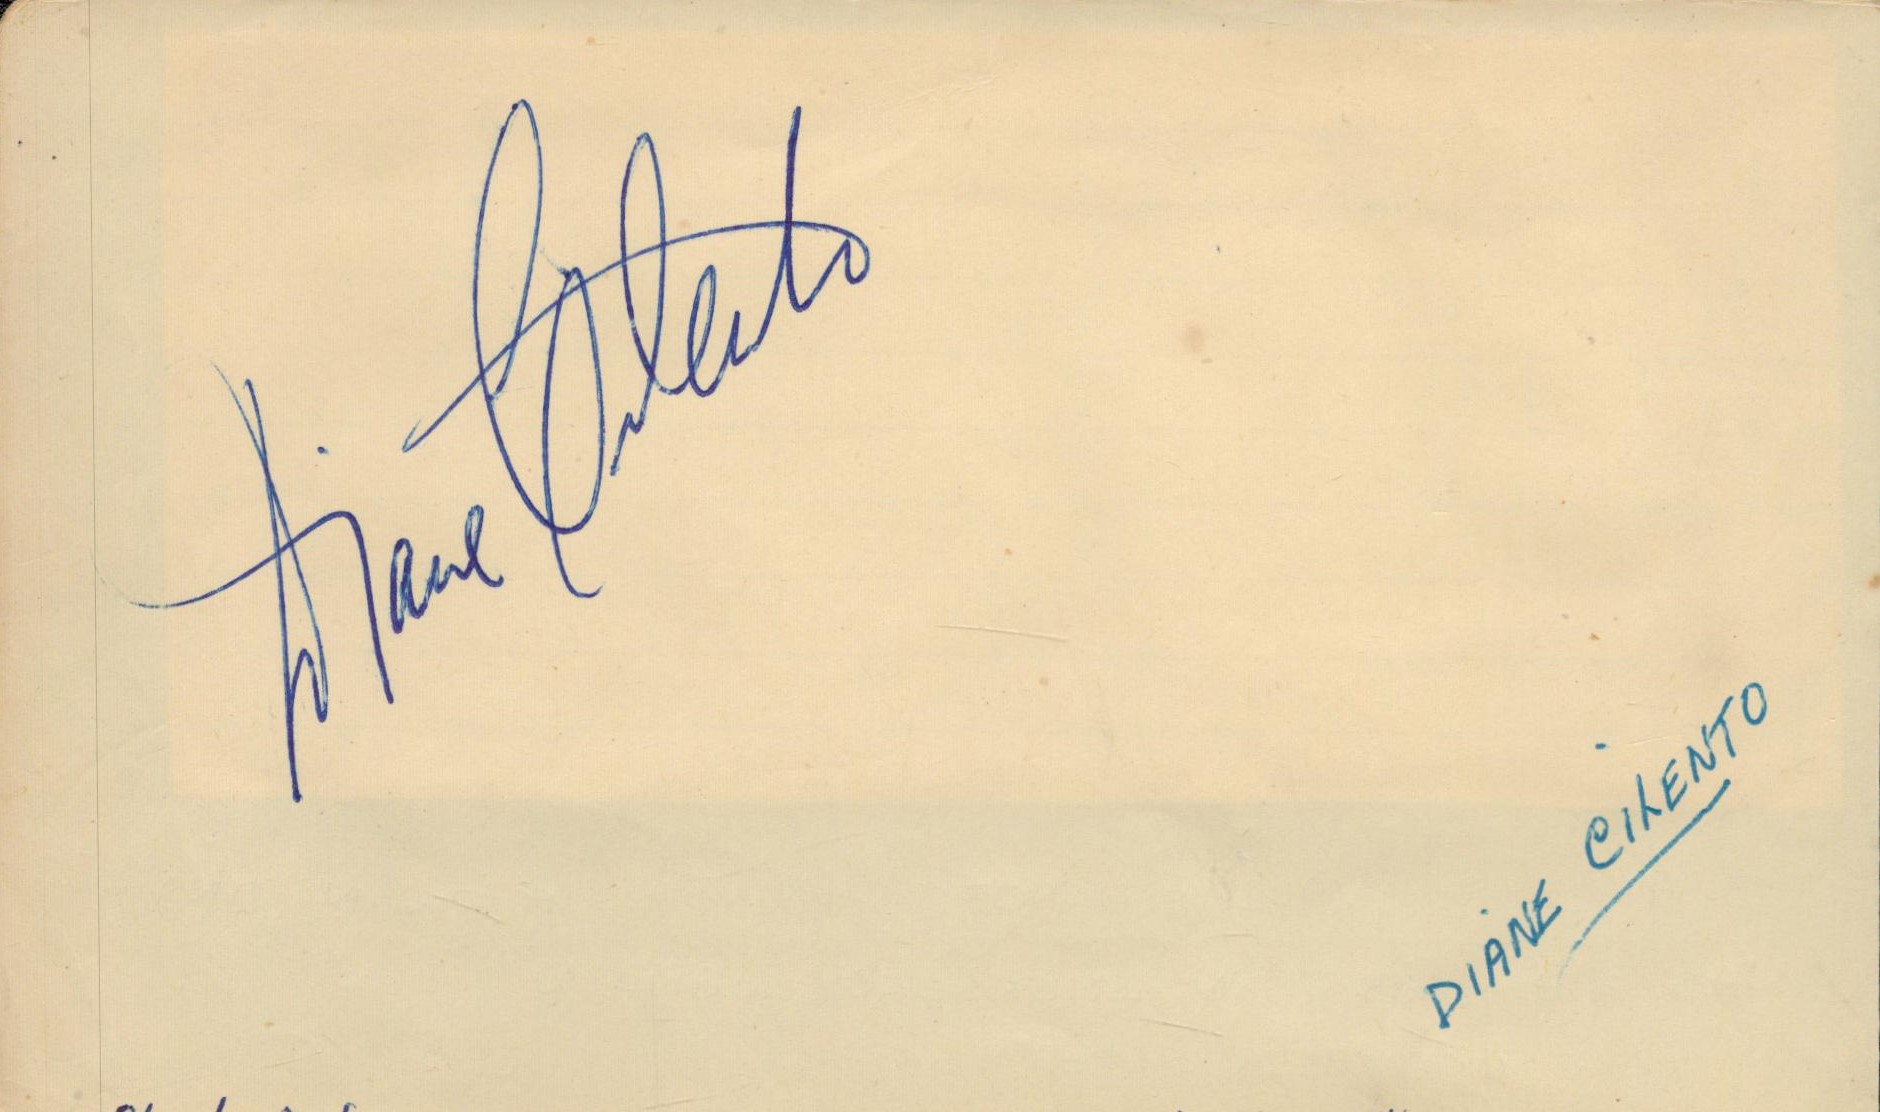 Books. Diane Cilento Signed Autograph Card Loosely inserted into The Manipulator 1st Edition - Image 2 of 4